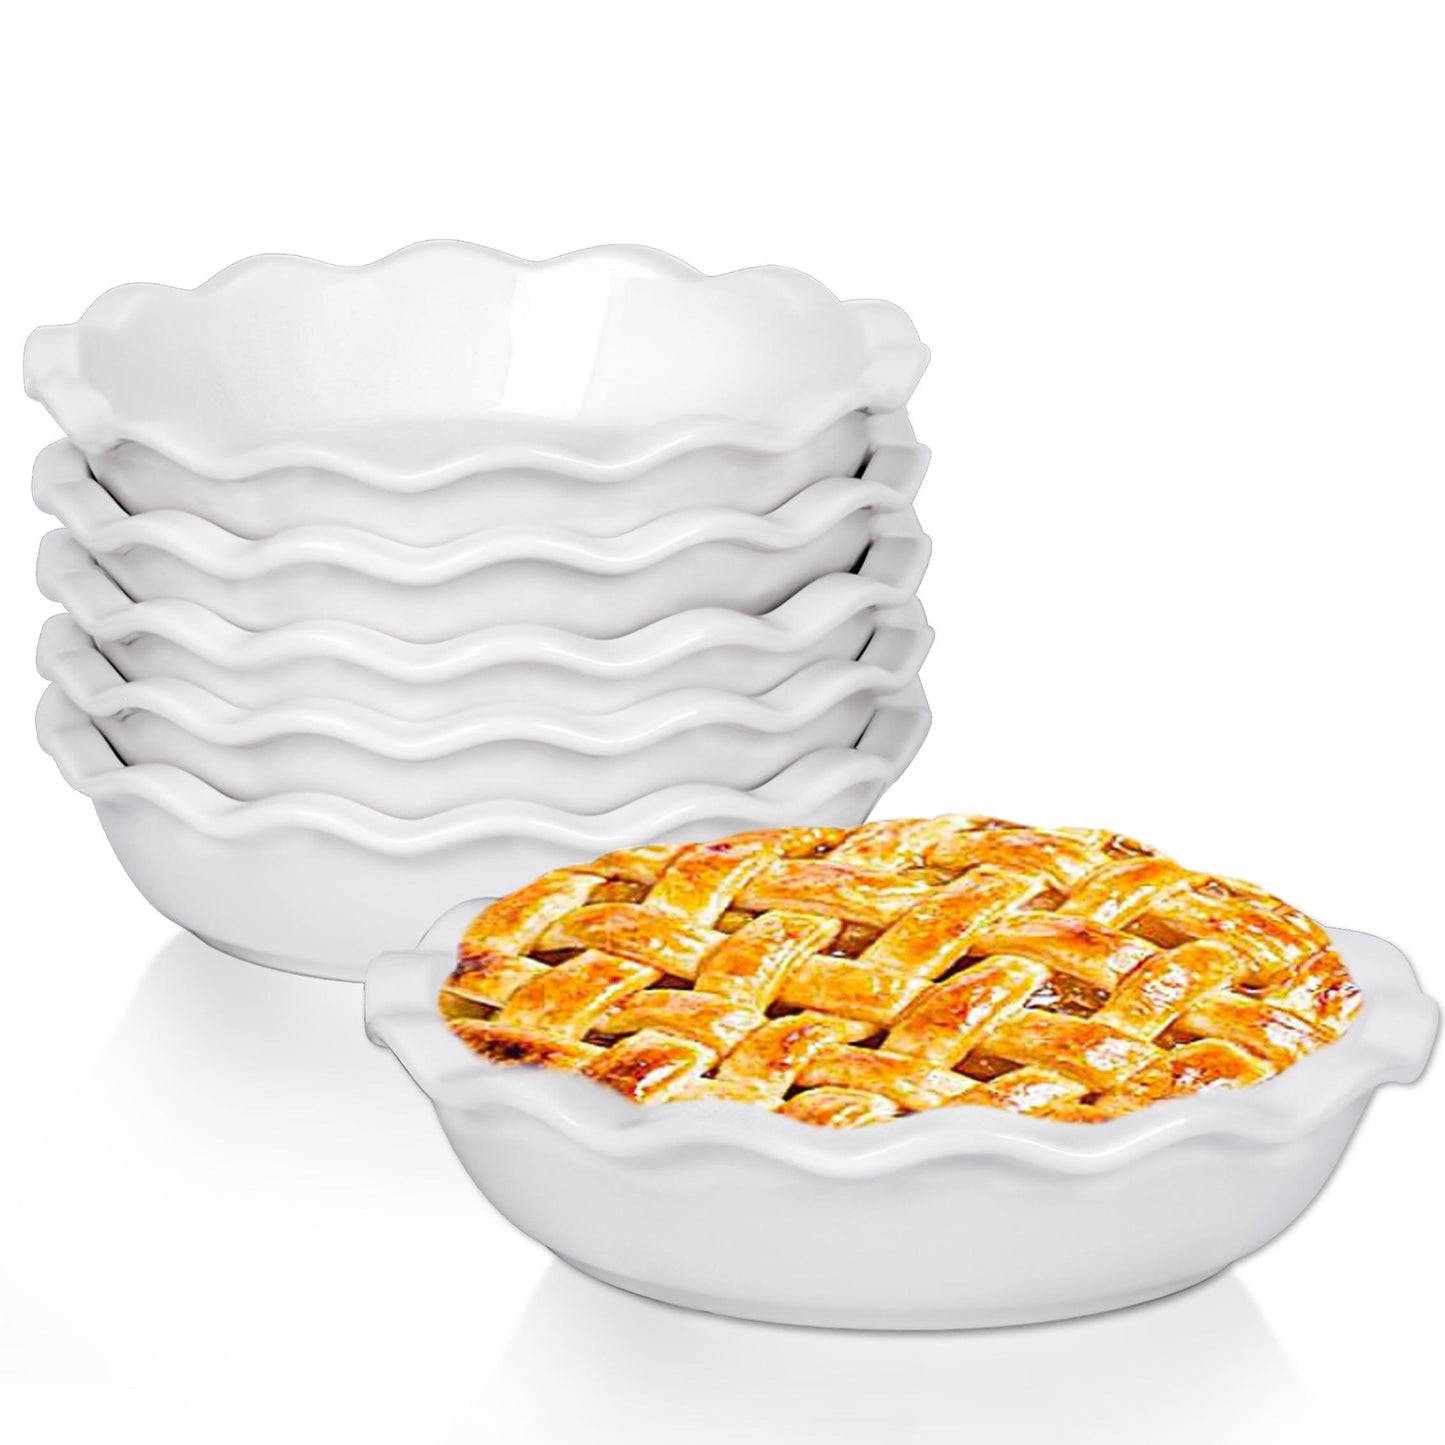 Taeochiy Ceramic Mini Pie Pans, 6.5 Inch Individual Small Pie Pans, 12 Oz Pie Dish Ramekins for Baking Chicken Pot Pie, Quiches, Fruit Pies, Set of 6, White - CookCave